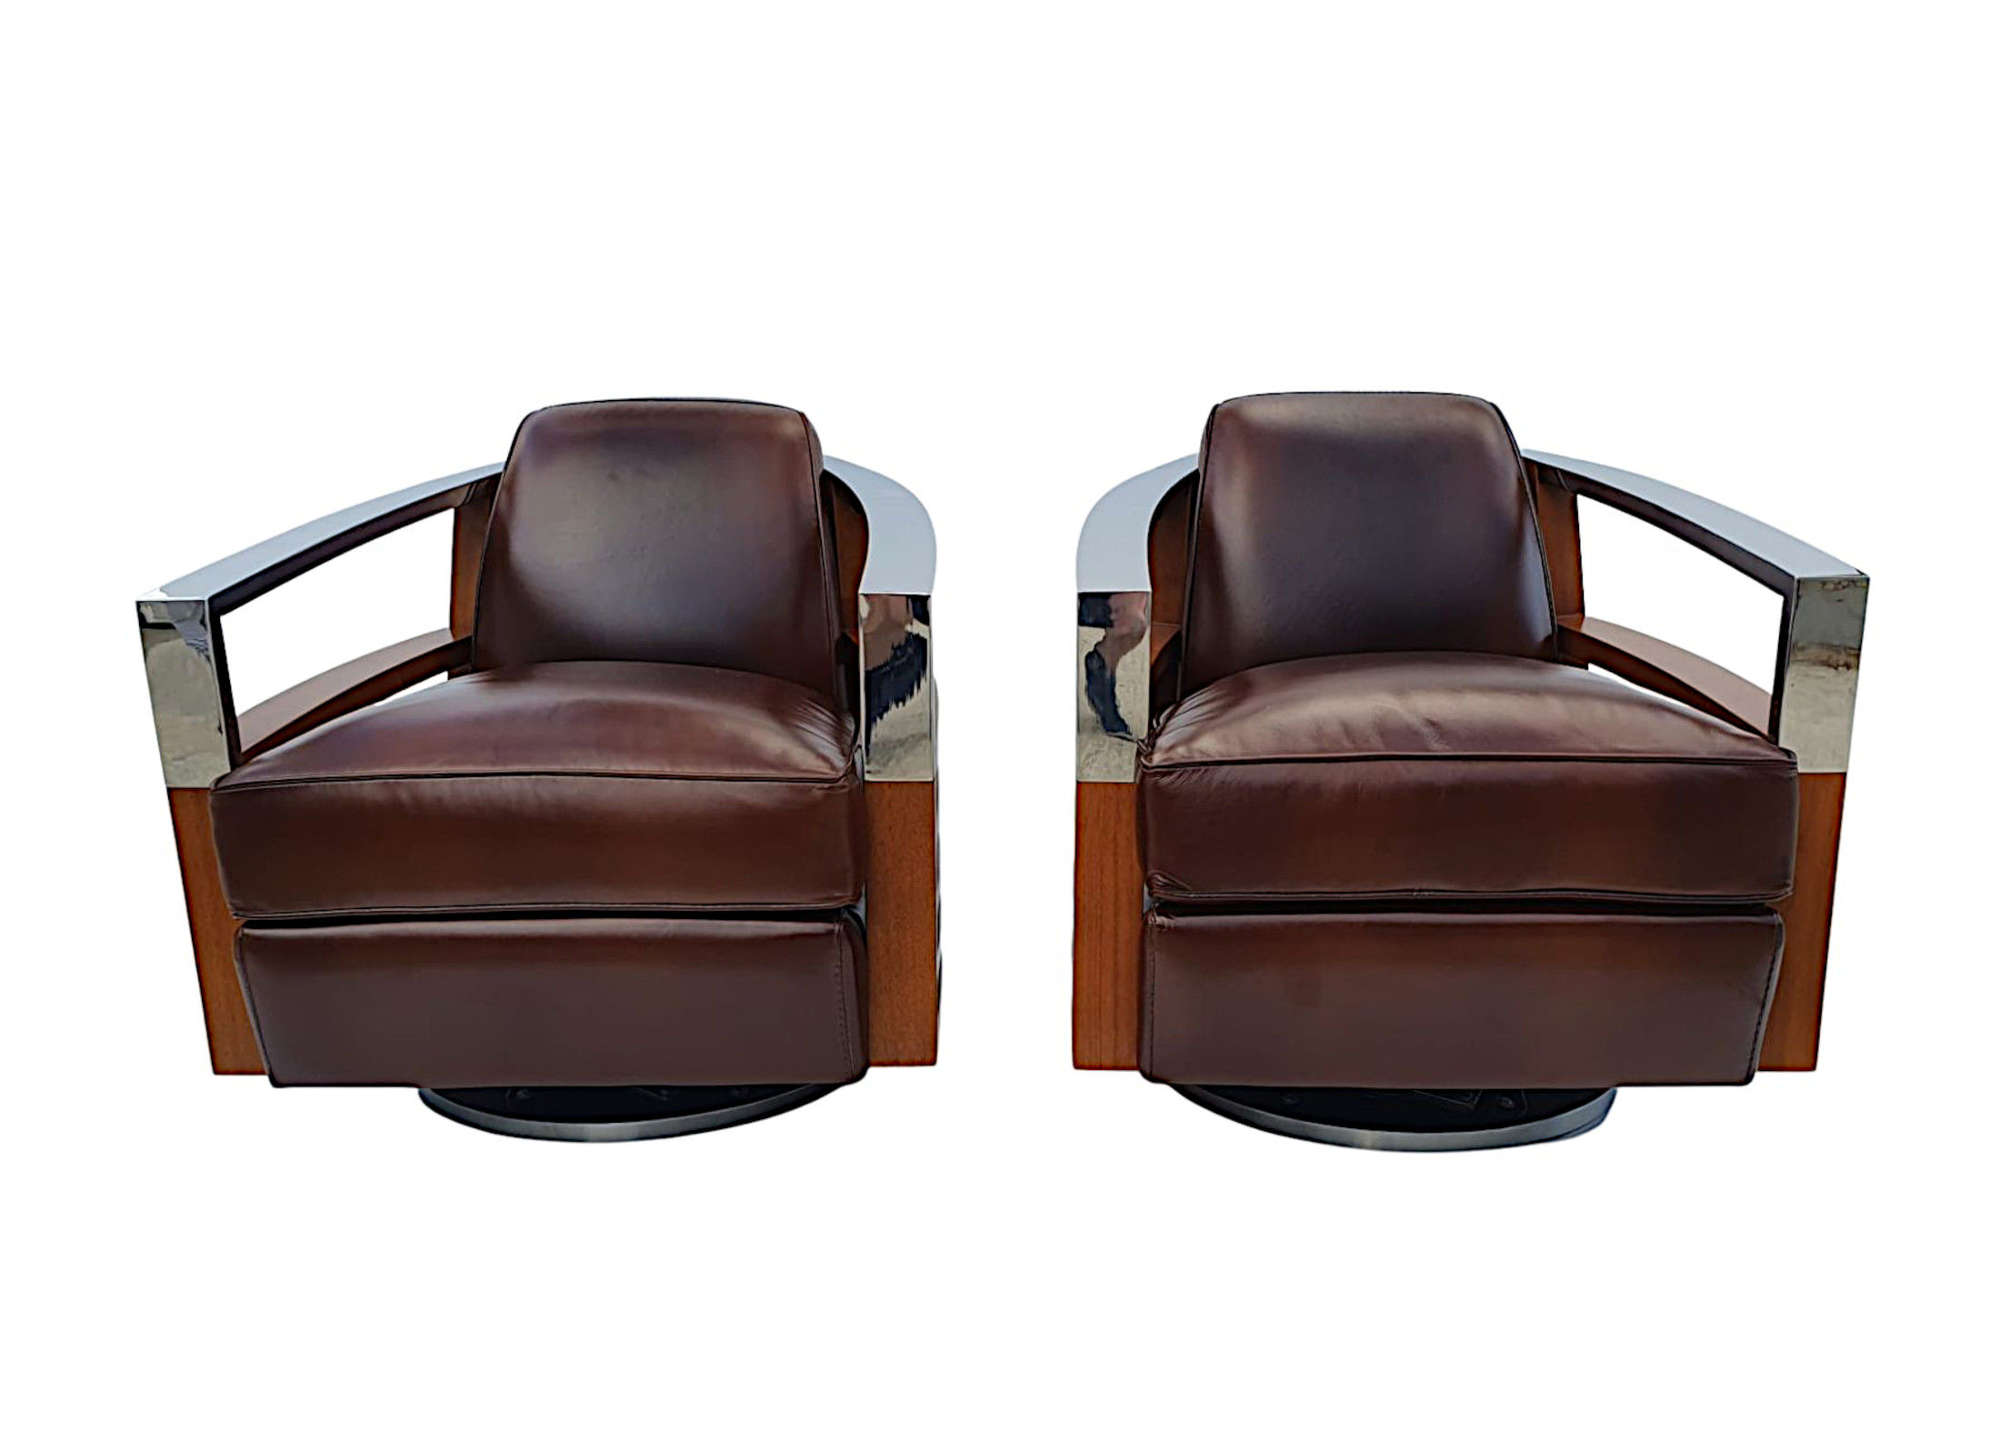 A Stunning Quality Pair of Contemporary Revolving Armchairs in the Art Deco Style